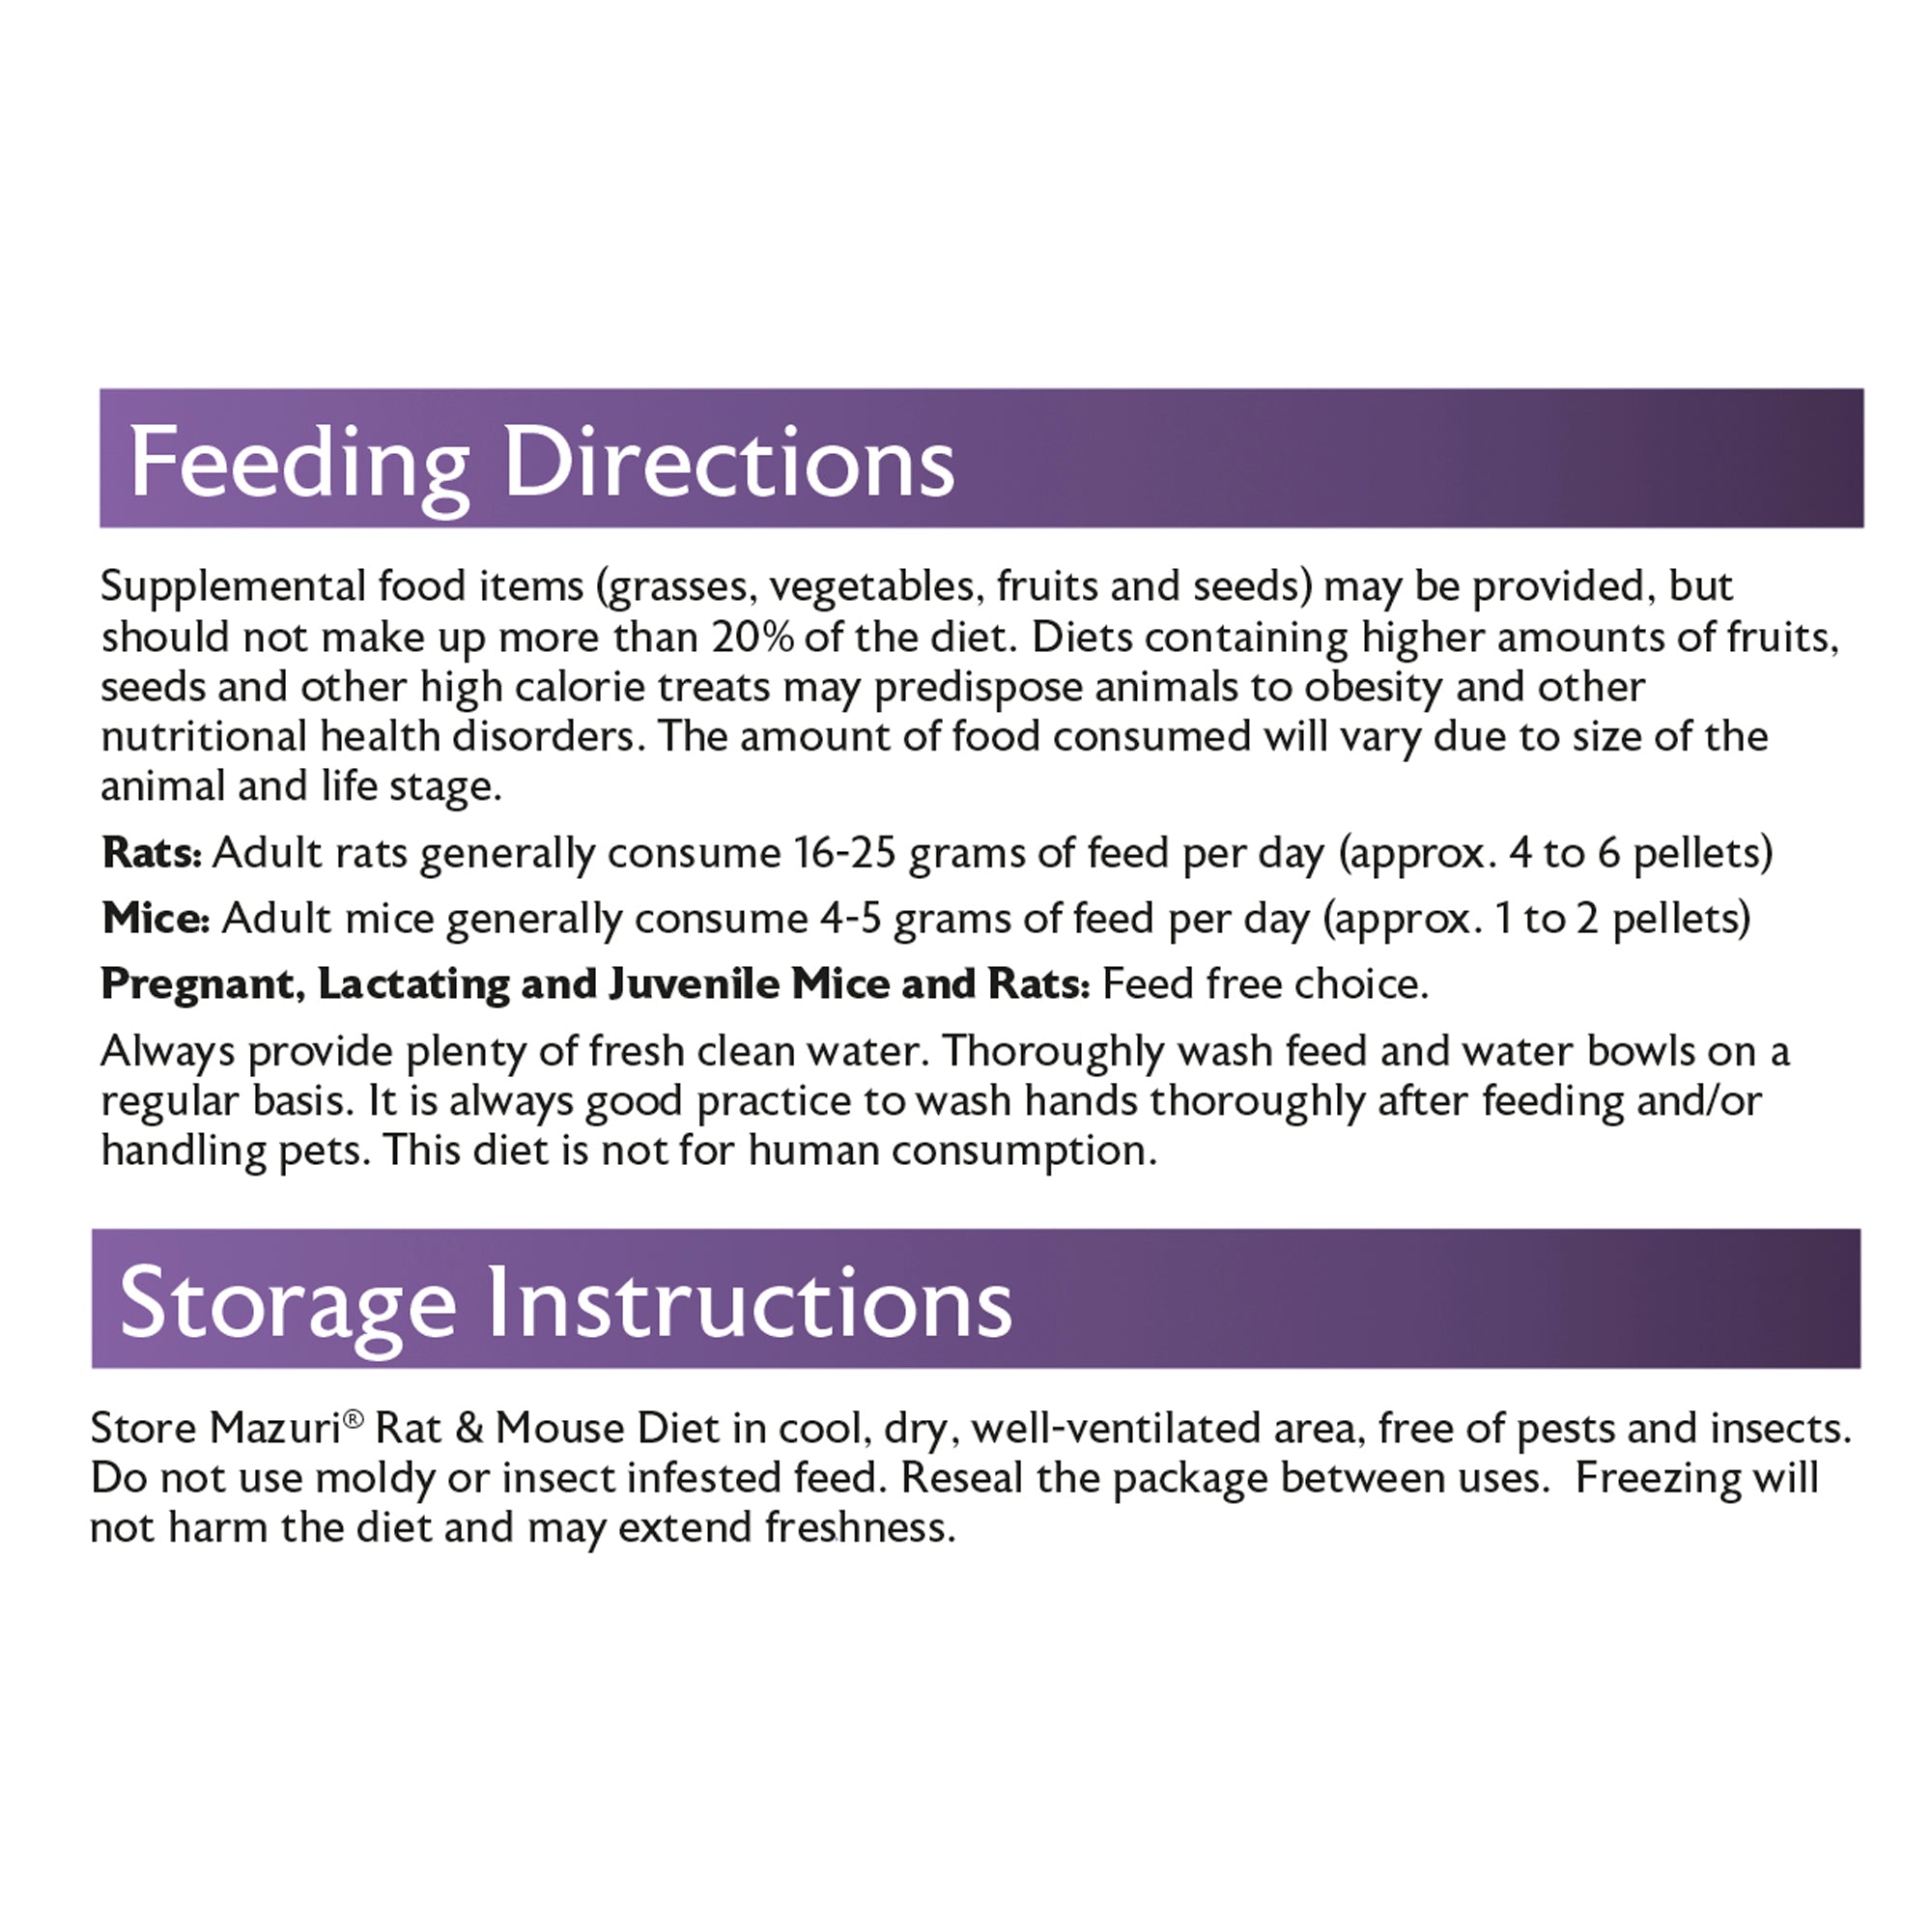 Rat & Mouse Diet Feeding Directions